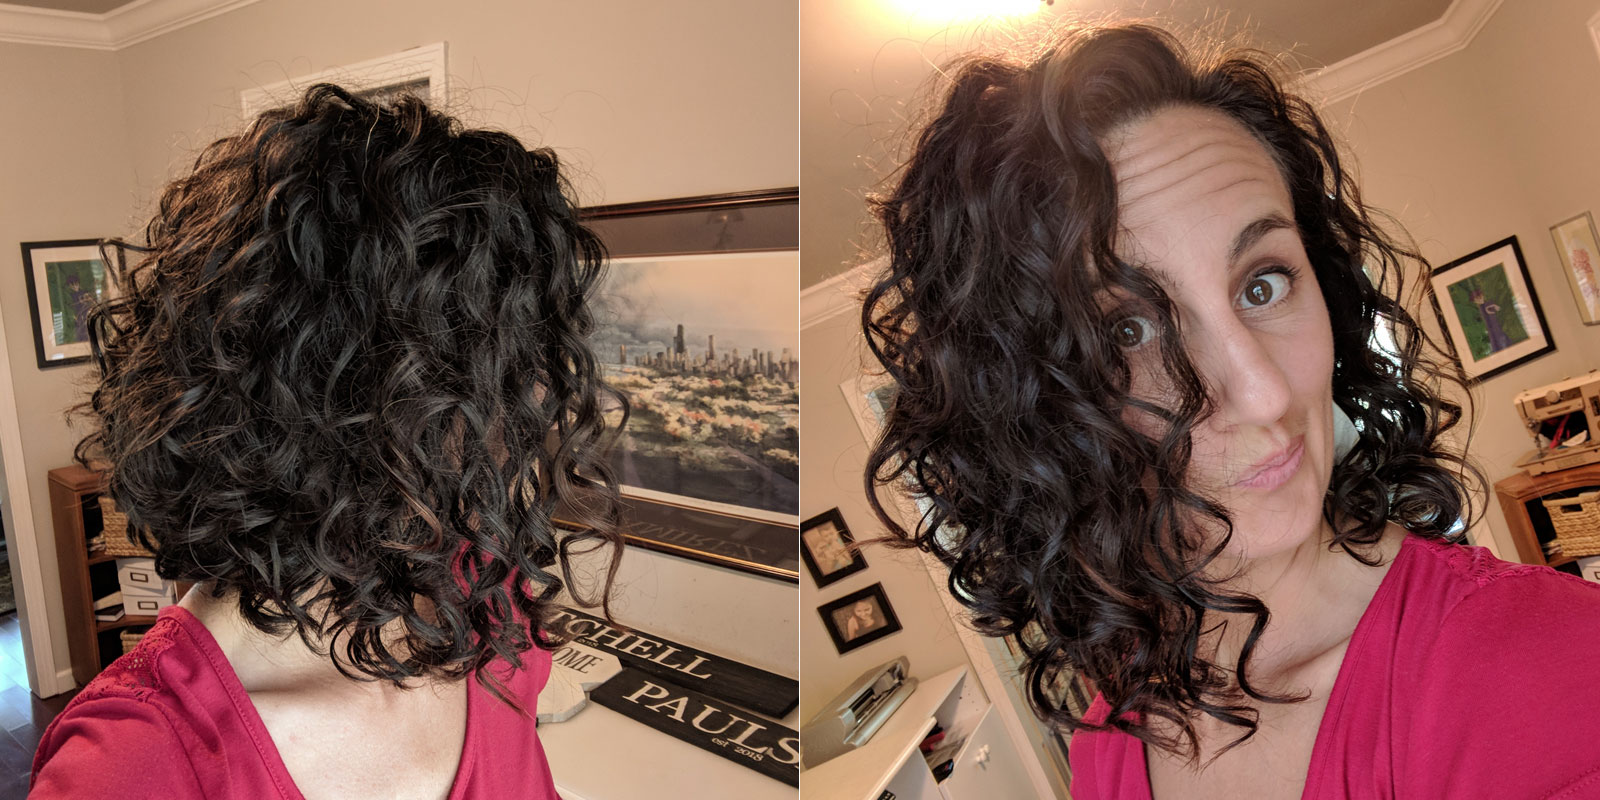 Curly Hair Wash Routine w/ Net Plopping! Does it work??